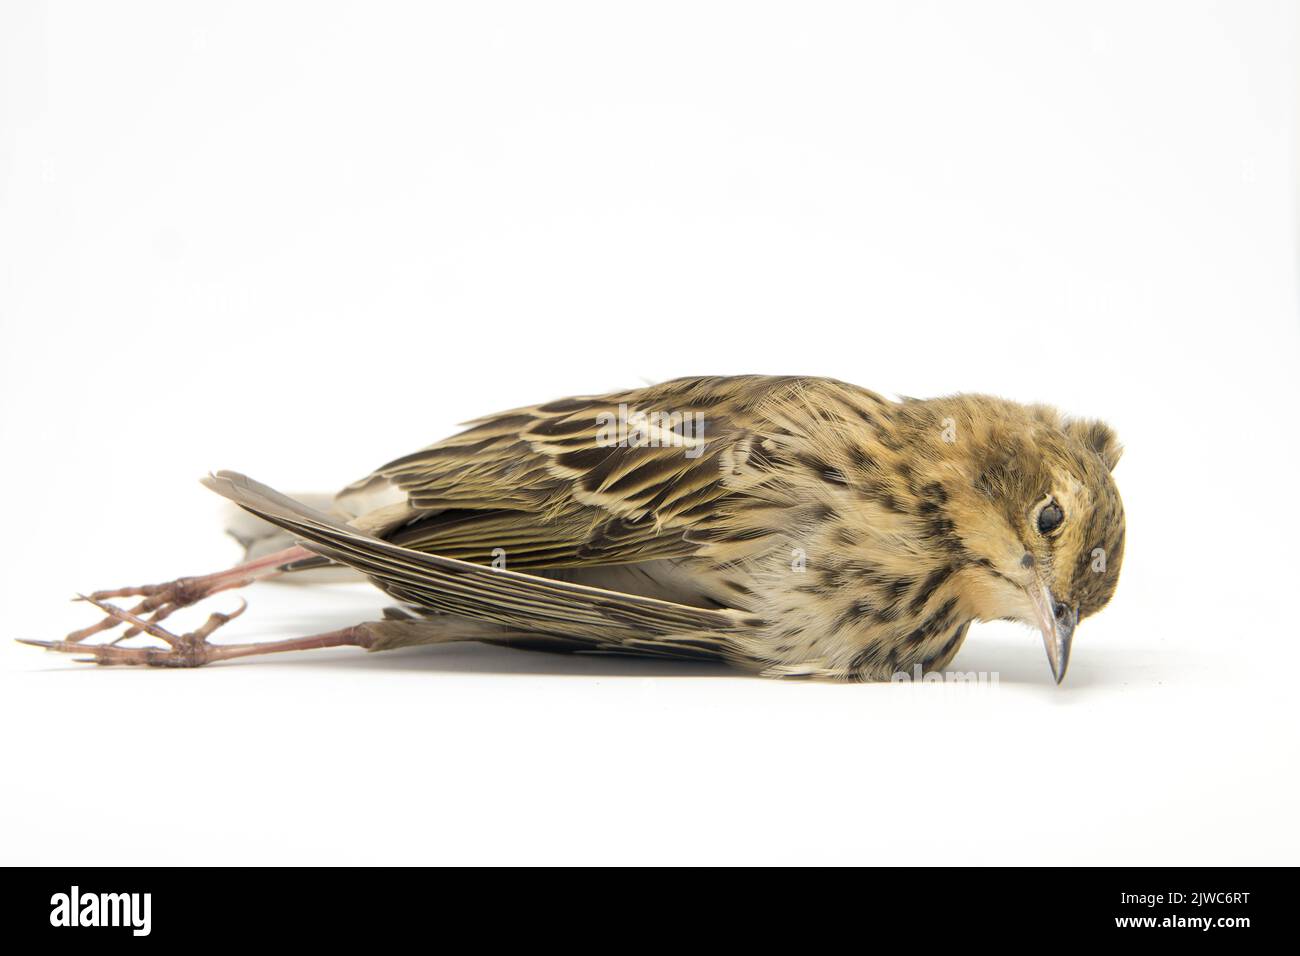 Dead bird. Deceased Tree Pipit in Latin Anthus Trivialis. White background. The body of dead animal. Bird flu suspected. Sick animal. Stock Photo